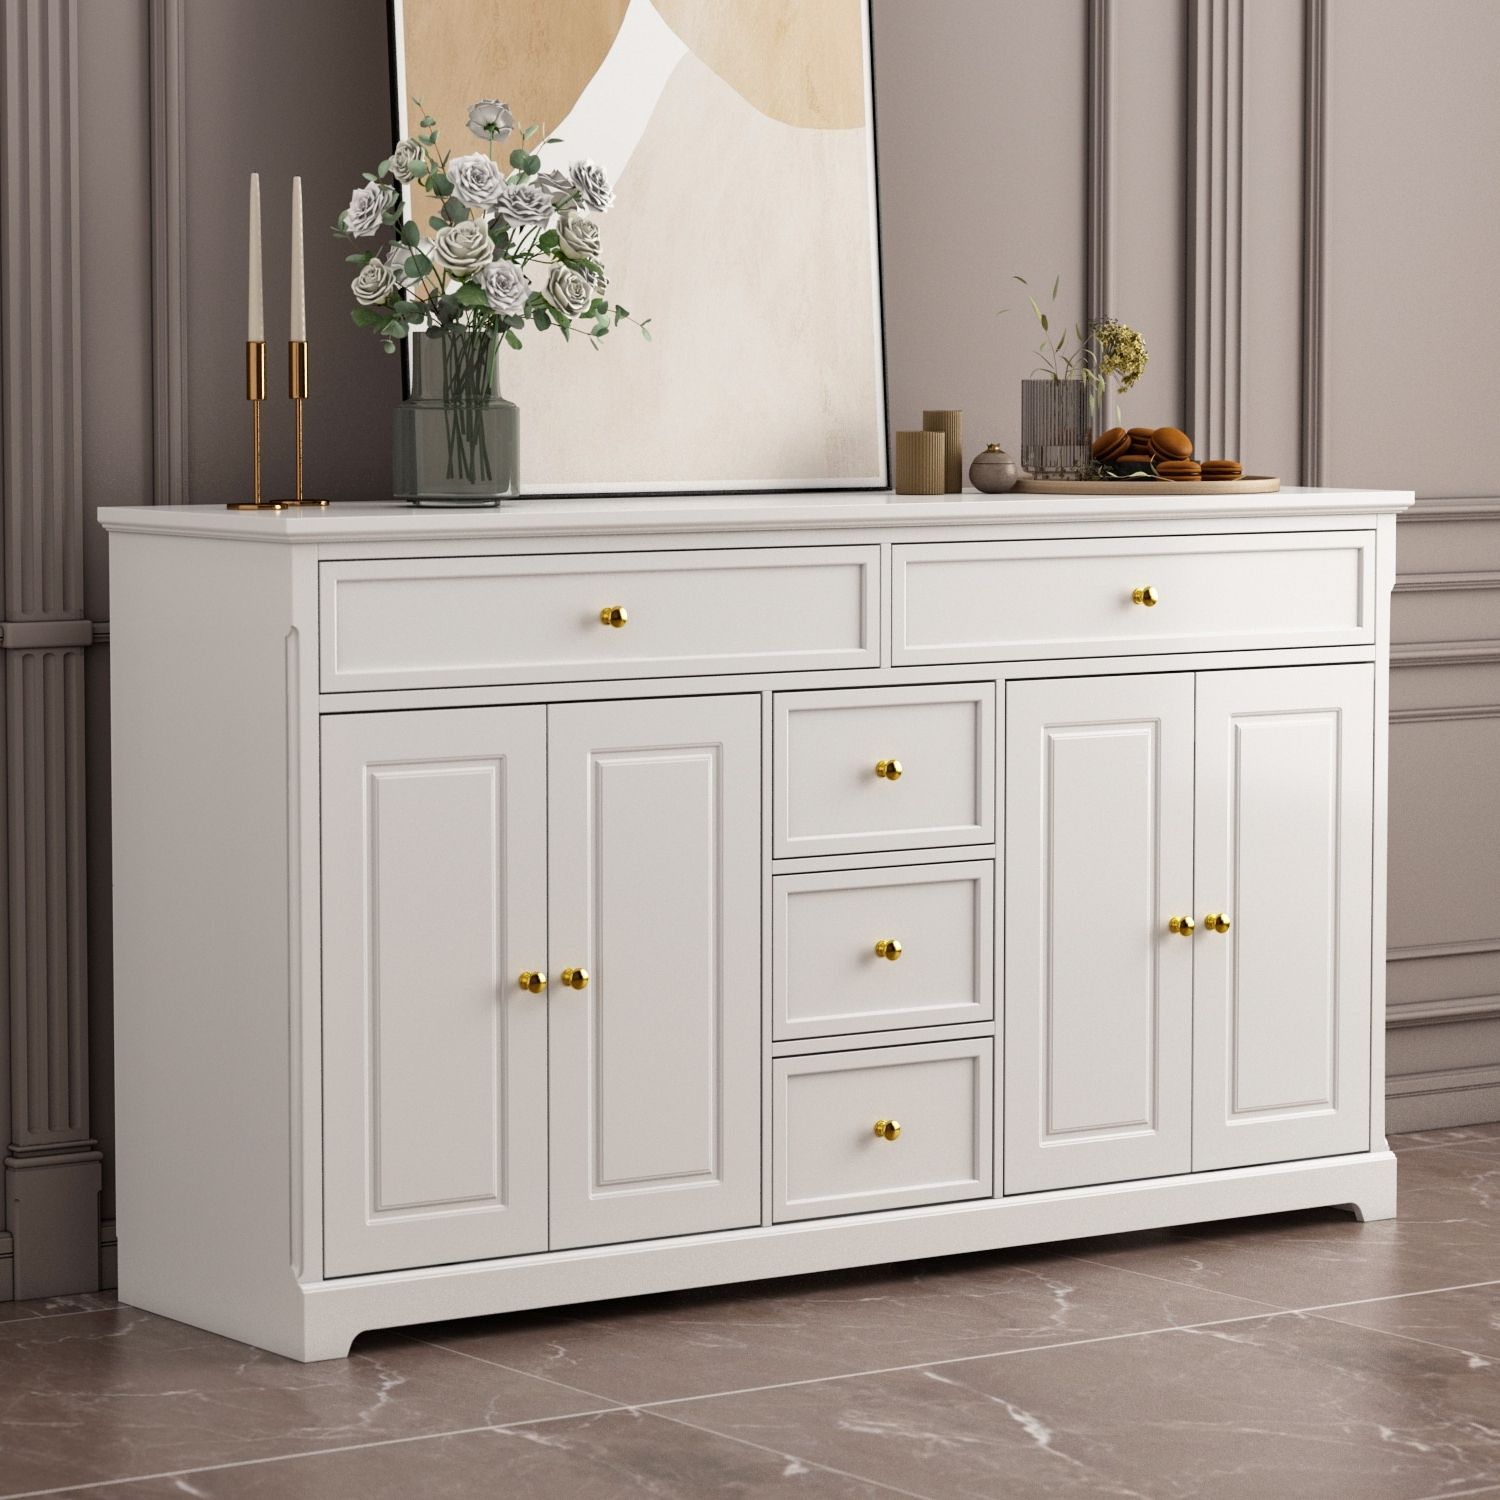 59.1''sideboard Buffet White Mid Century Modern Contemporary Lacquered – On  Sale – Bed Bath & Beyond – 36540538 In Mid Century Modern White Sideboards (Gallery 2 of 20)